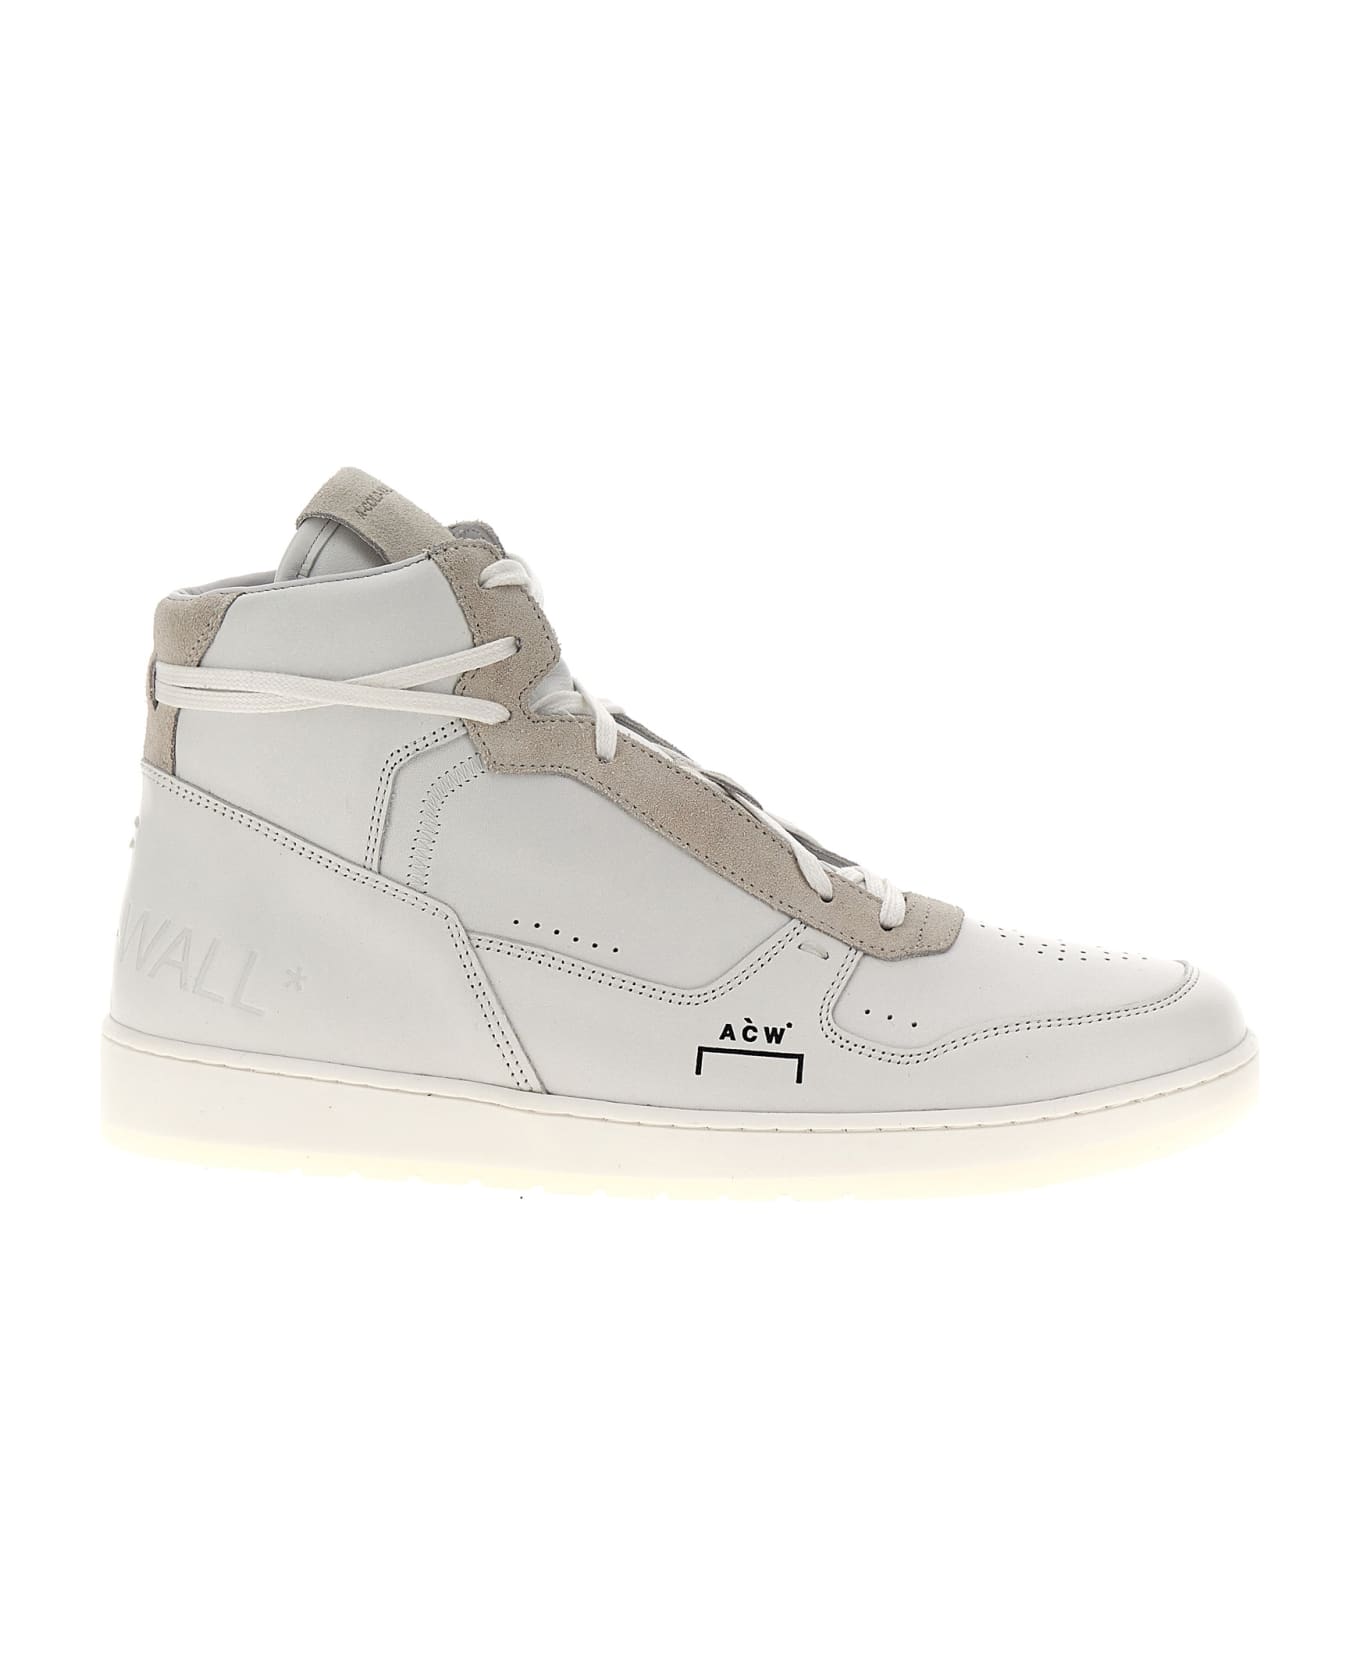 A-COLD-WALL 'luol Hi Top' Sneakers - White